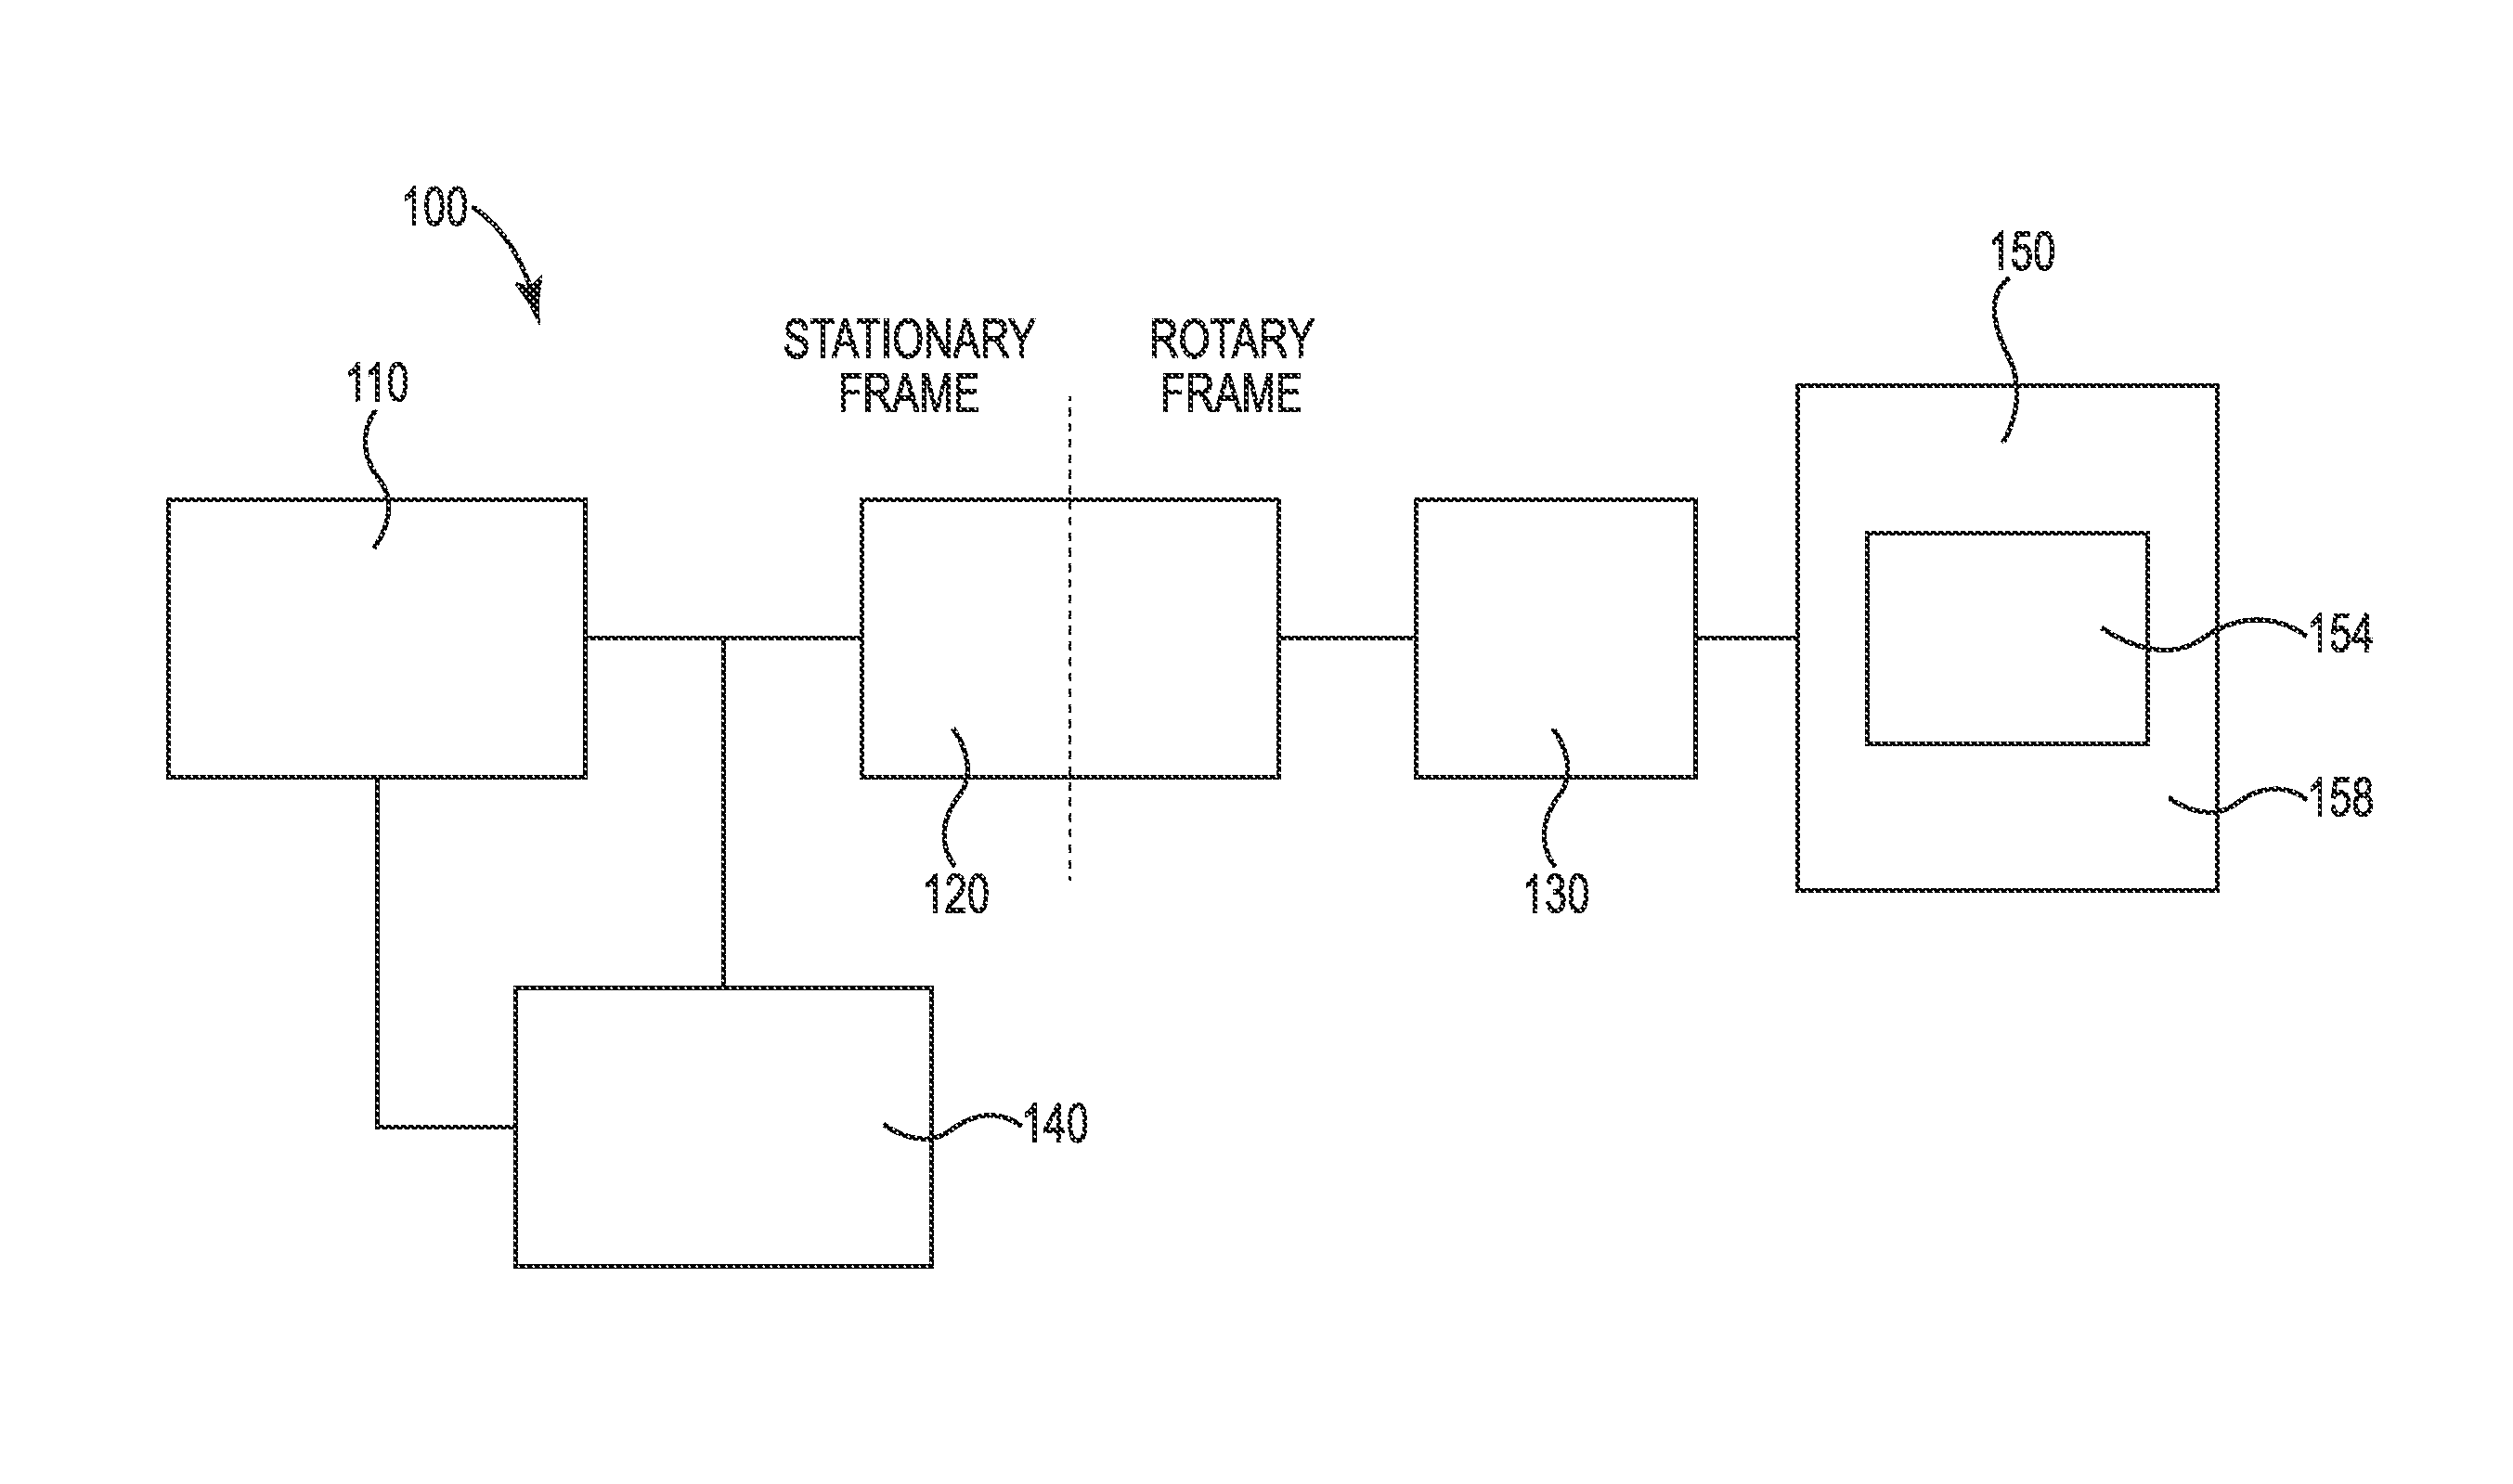 Wound Field Synchronous Machine with Resonant Field Exciter